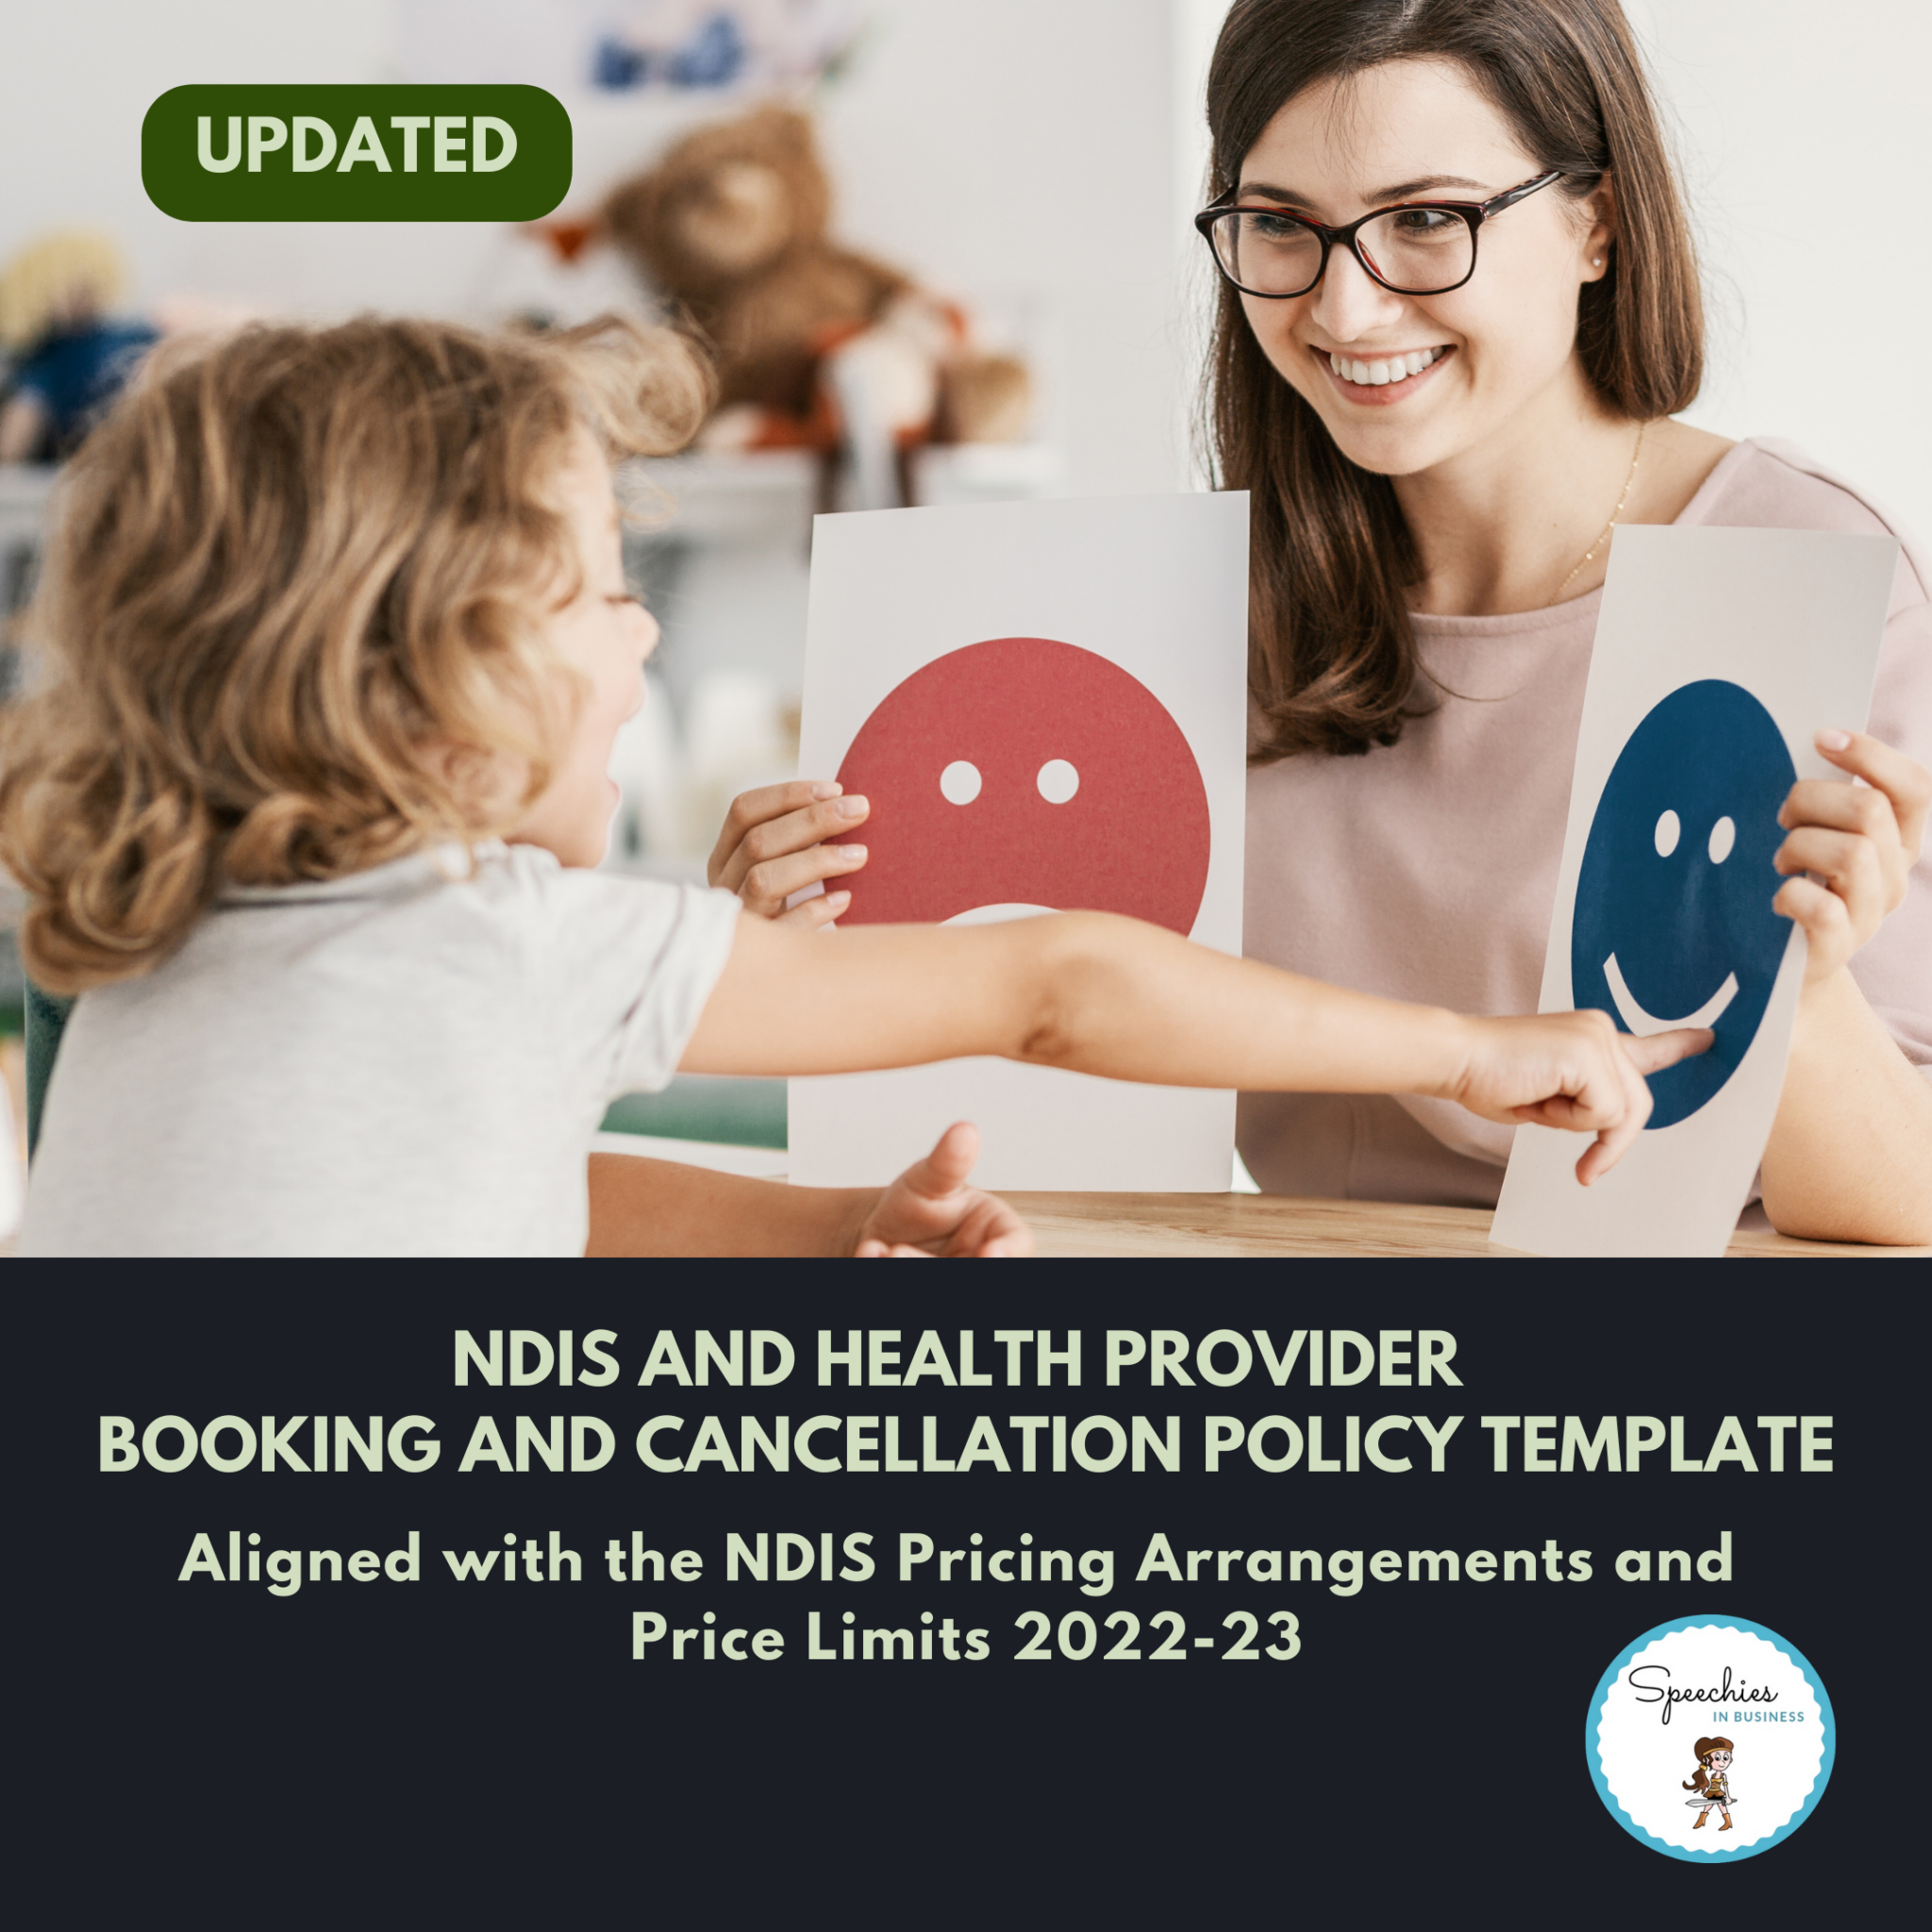 NDIS and Health Provider Booking and Cancellation Policy Template